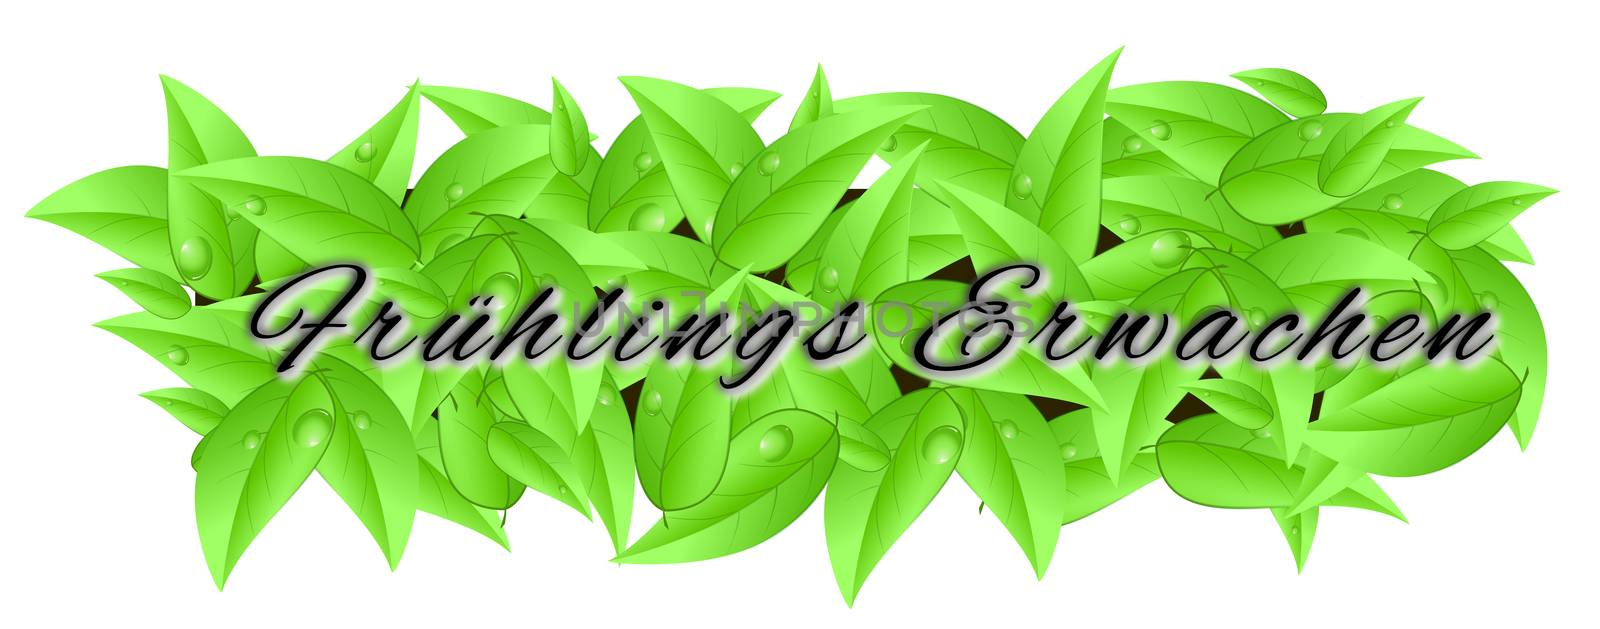 Banner made of leaves isolated on a white background with inscription "spring season"